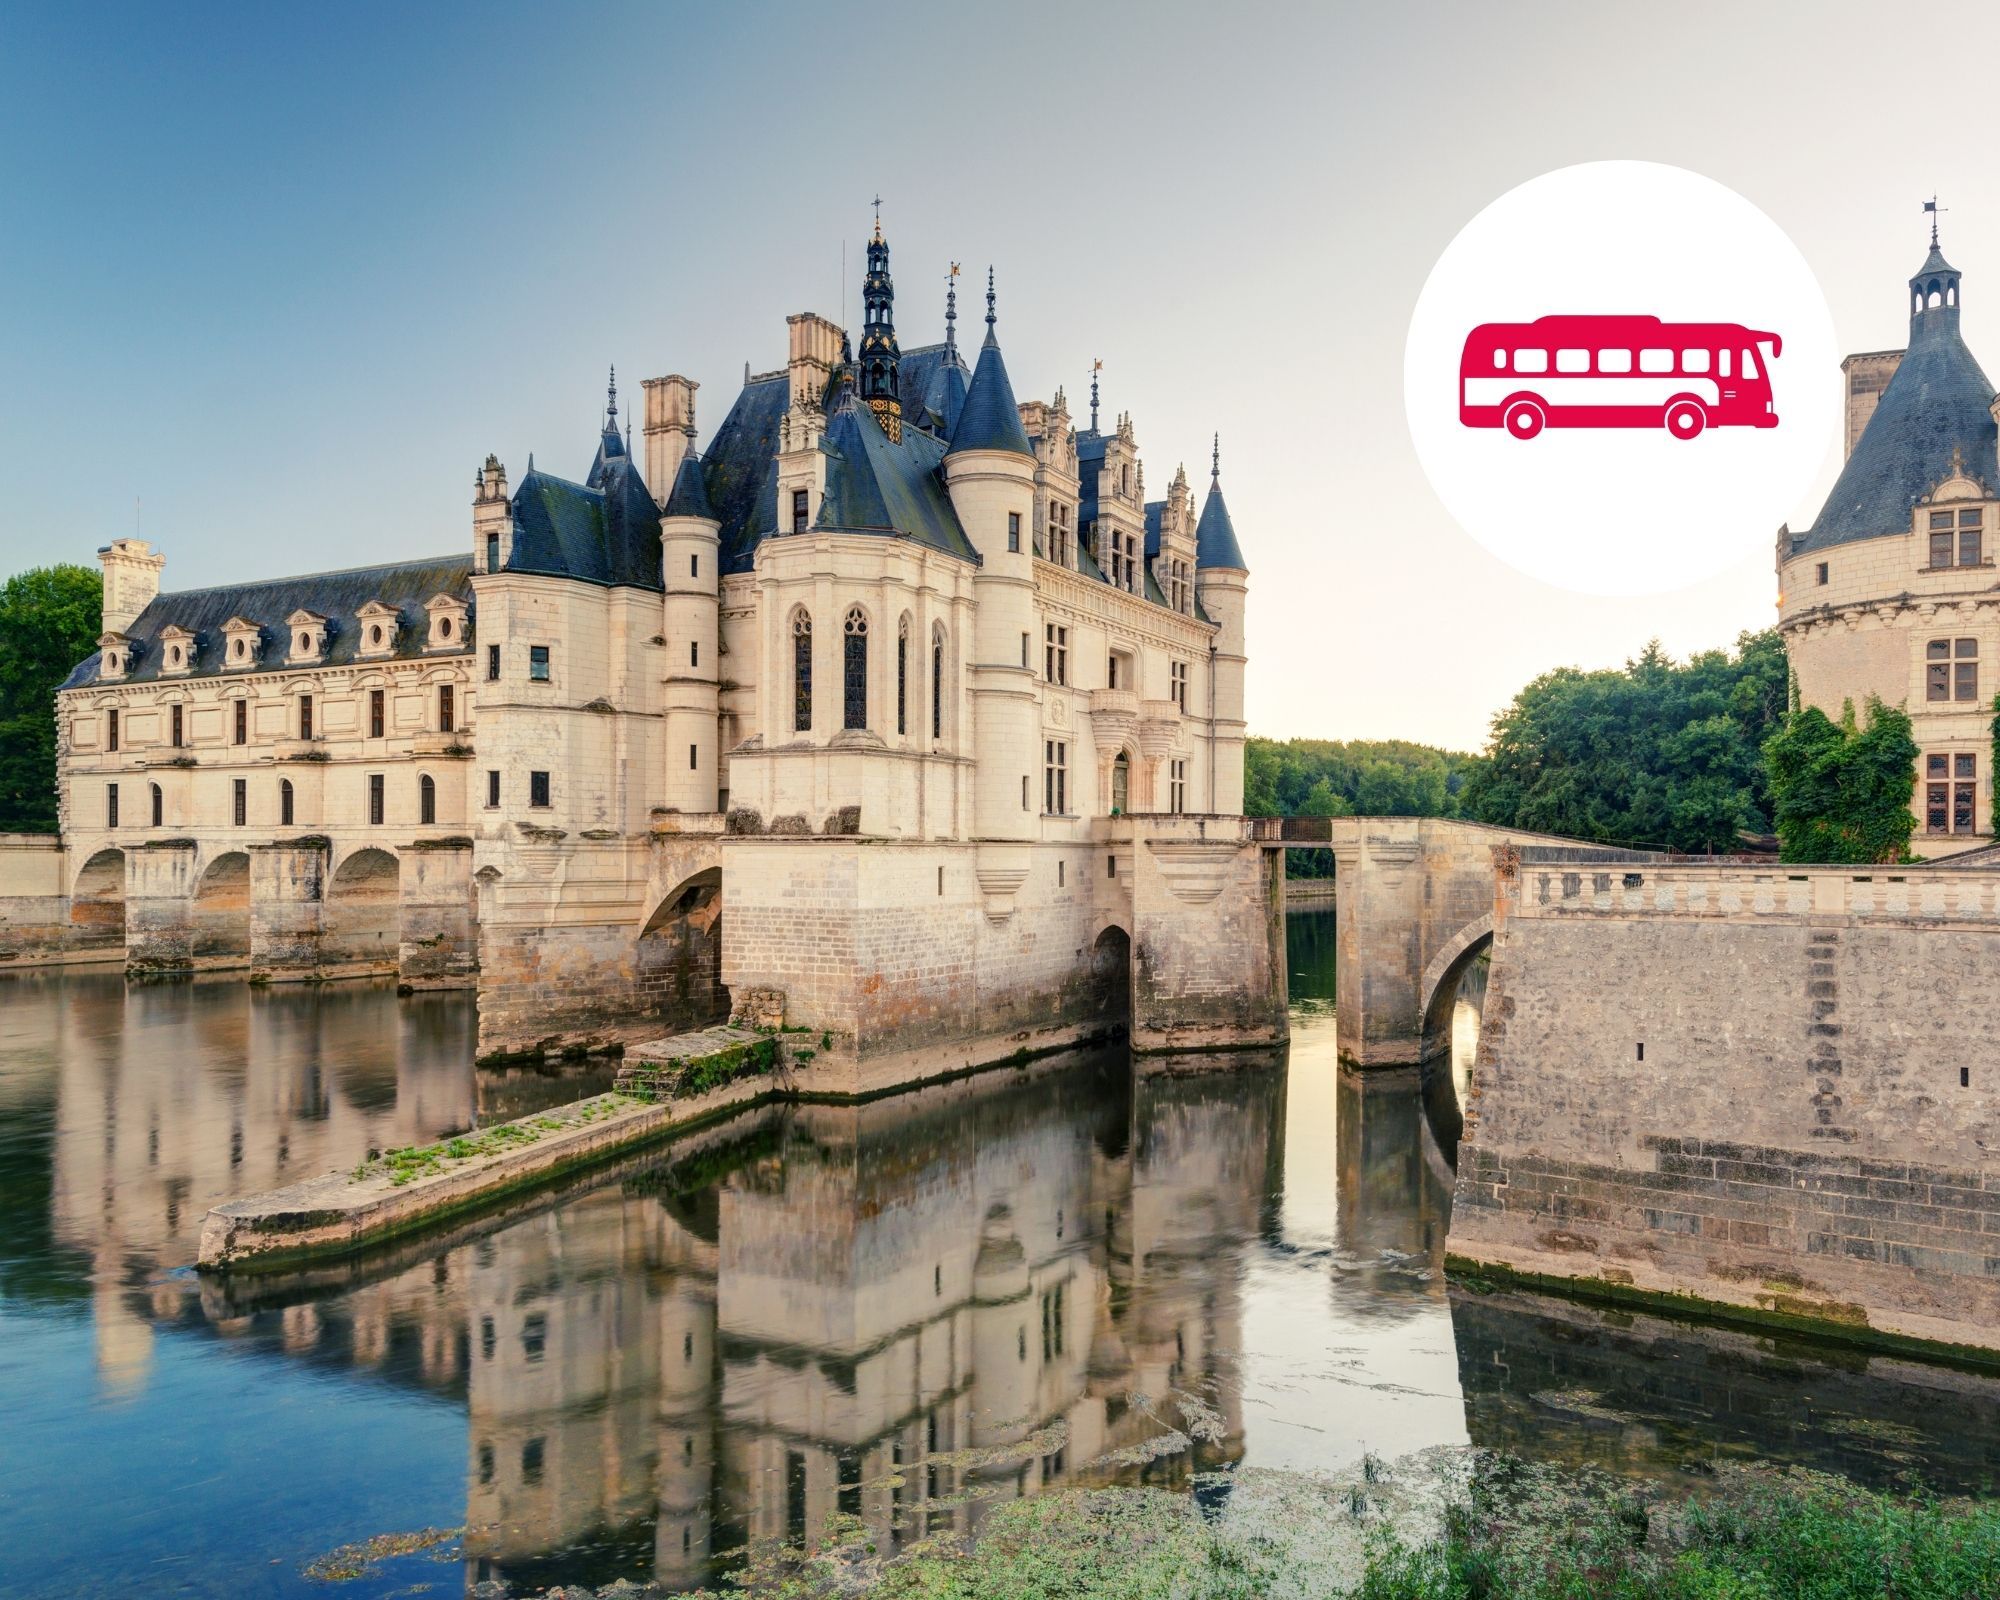 All day trip guided tour of the Loire Valley Castles with transportation from Paris